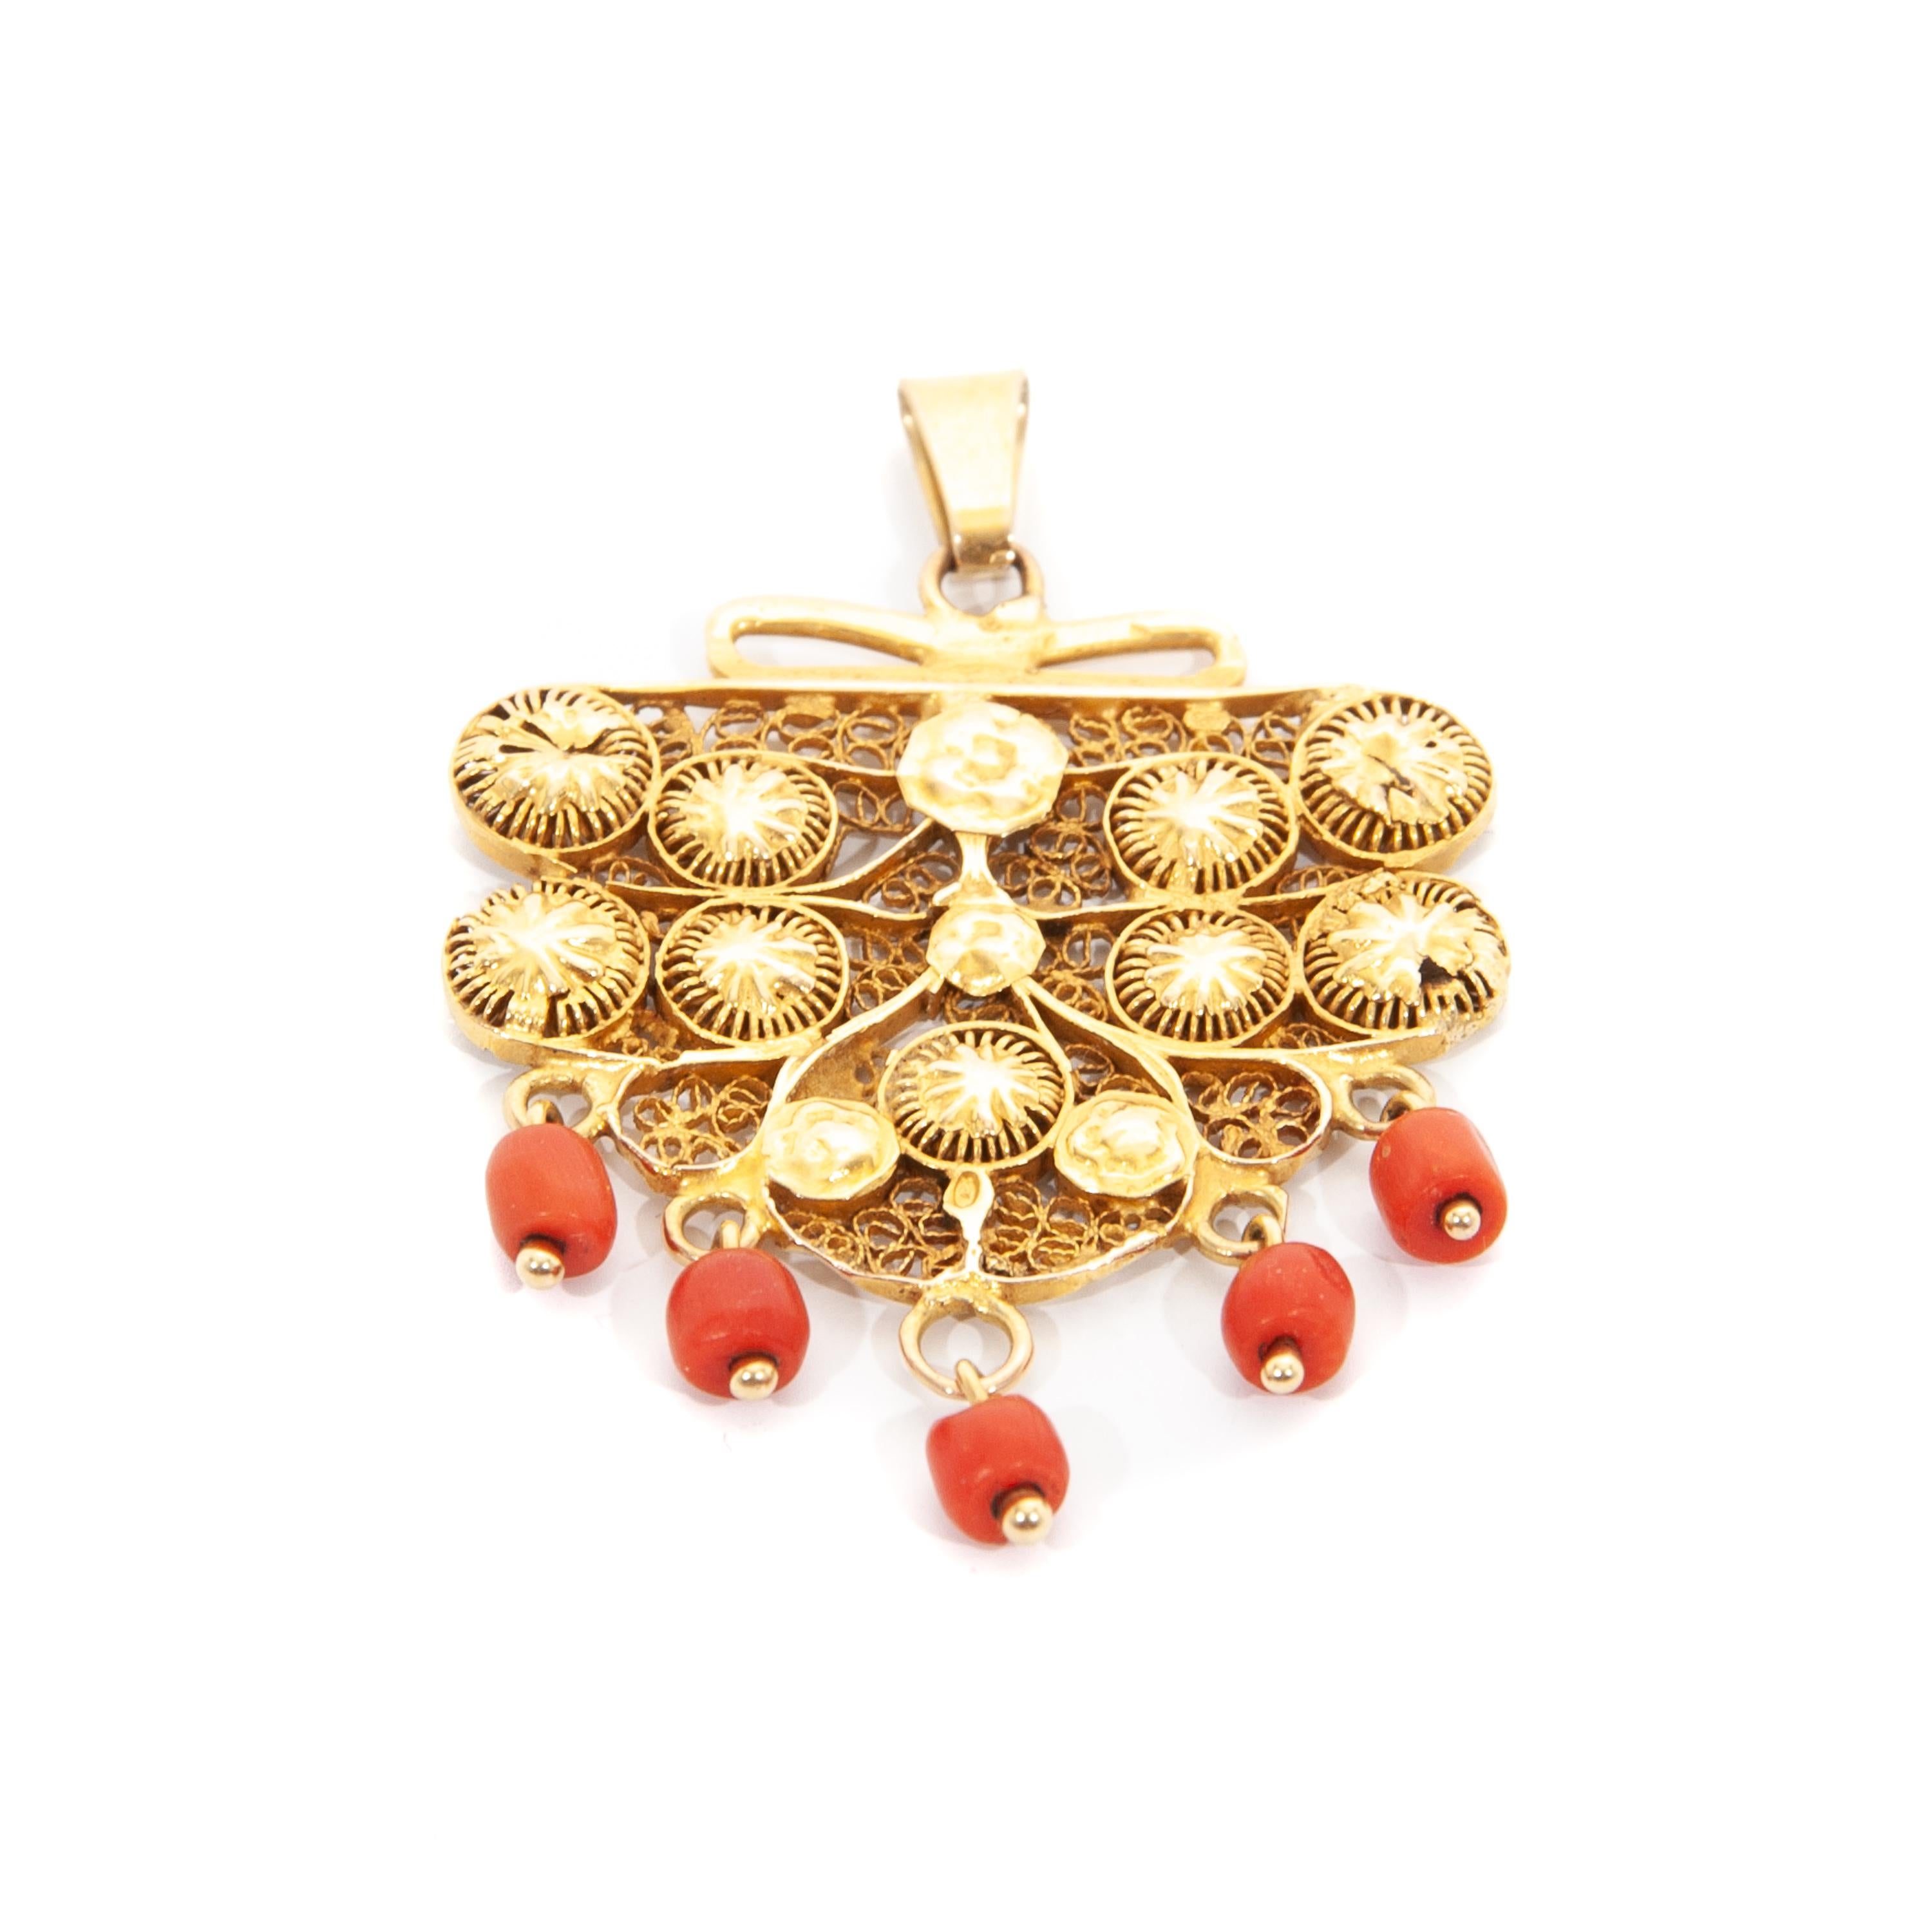 This is an antique 14 karat yellow gold pendant created with five natural red coral bead stones. The gold is made of fine filigree and cannetille work. The cannetille work on this pendant is beautiful, it typically features fine gold wires or thinly